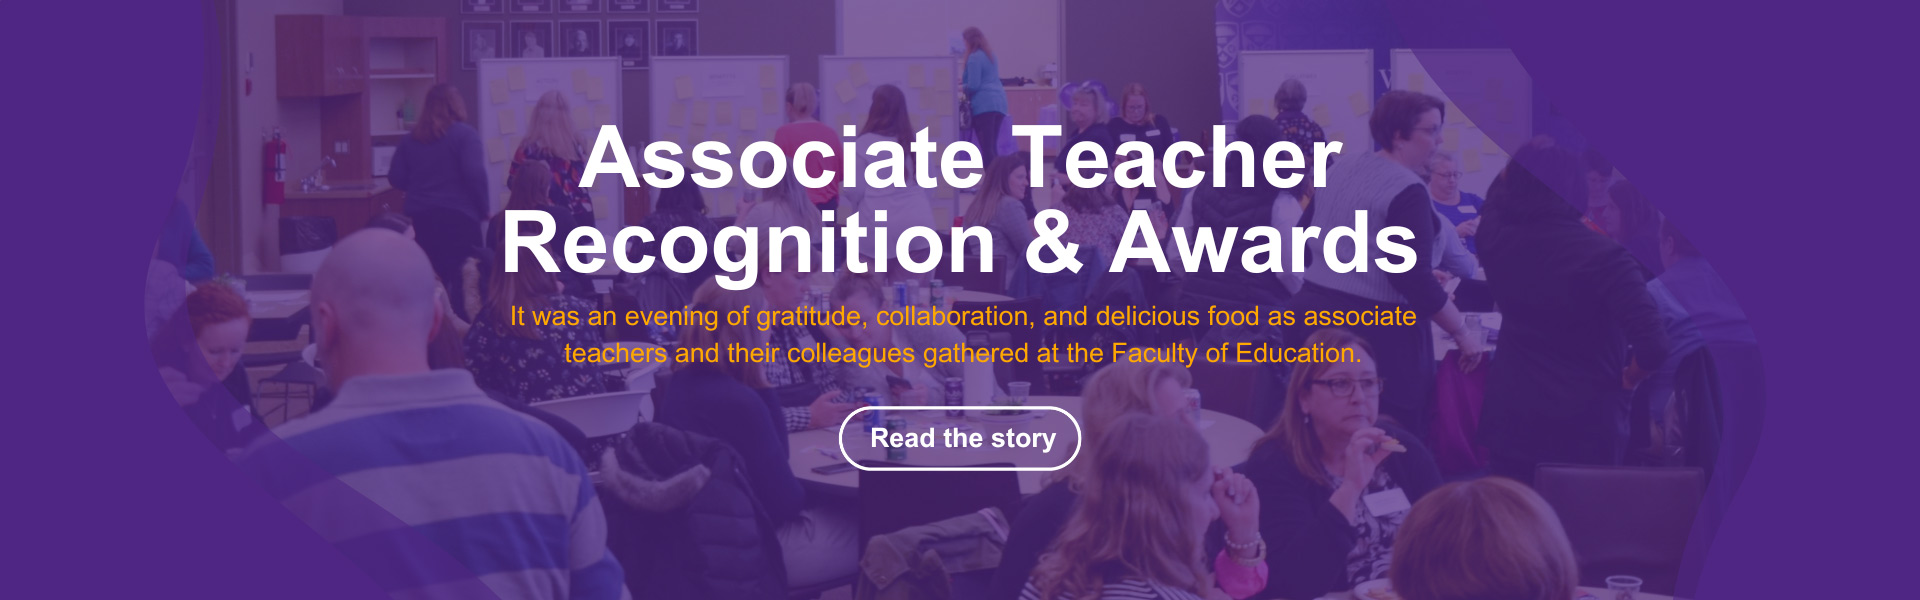 Associate Teacher Recognitiona and Awards: It was an evening of gratitude, collaboration and delicious food as teachers and their colleagues gathered at the Faculty of Education. Read the Story.